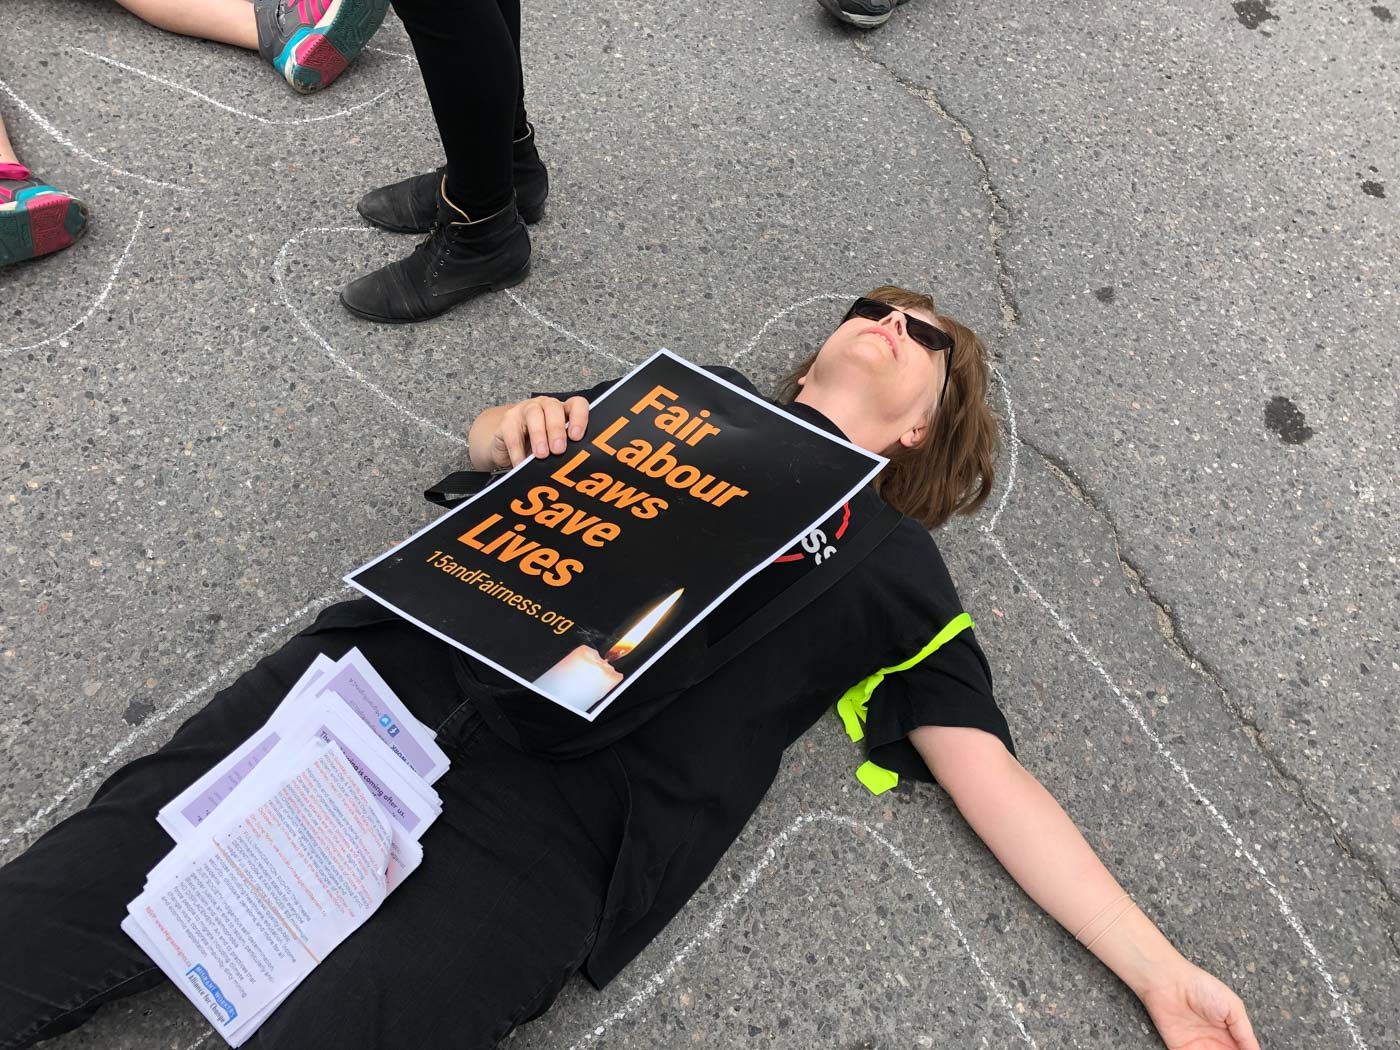 MIGRANT WORK IN CANADA. Protesters stage a 'die-in' to demonstrate the precarious nature of migrant work and the deaths that occur in unsafe job sites. Photo by Marites Sison 